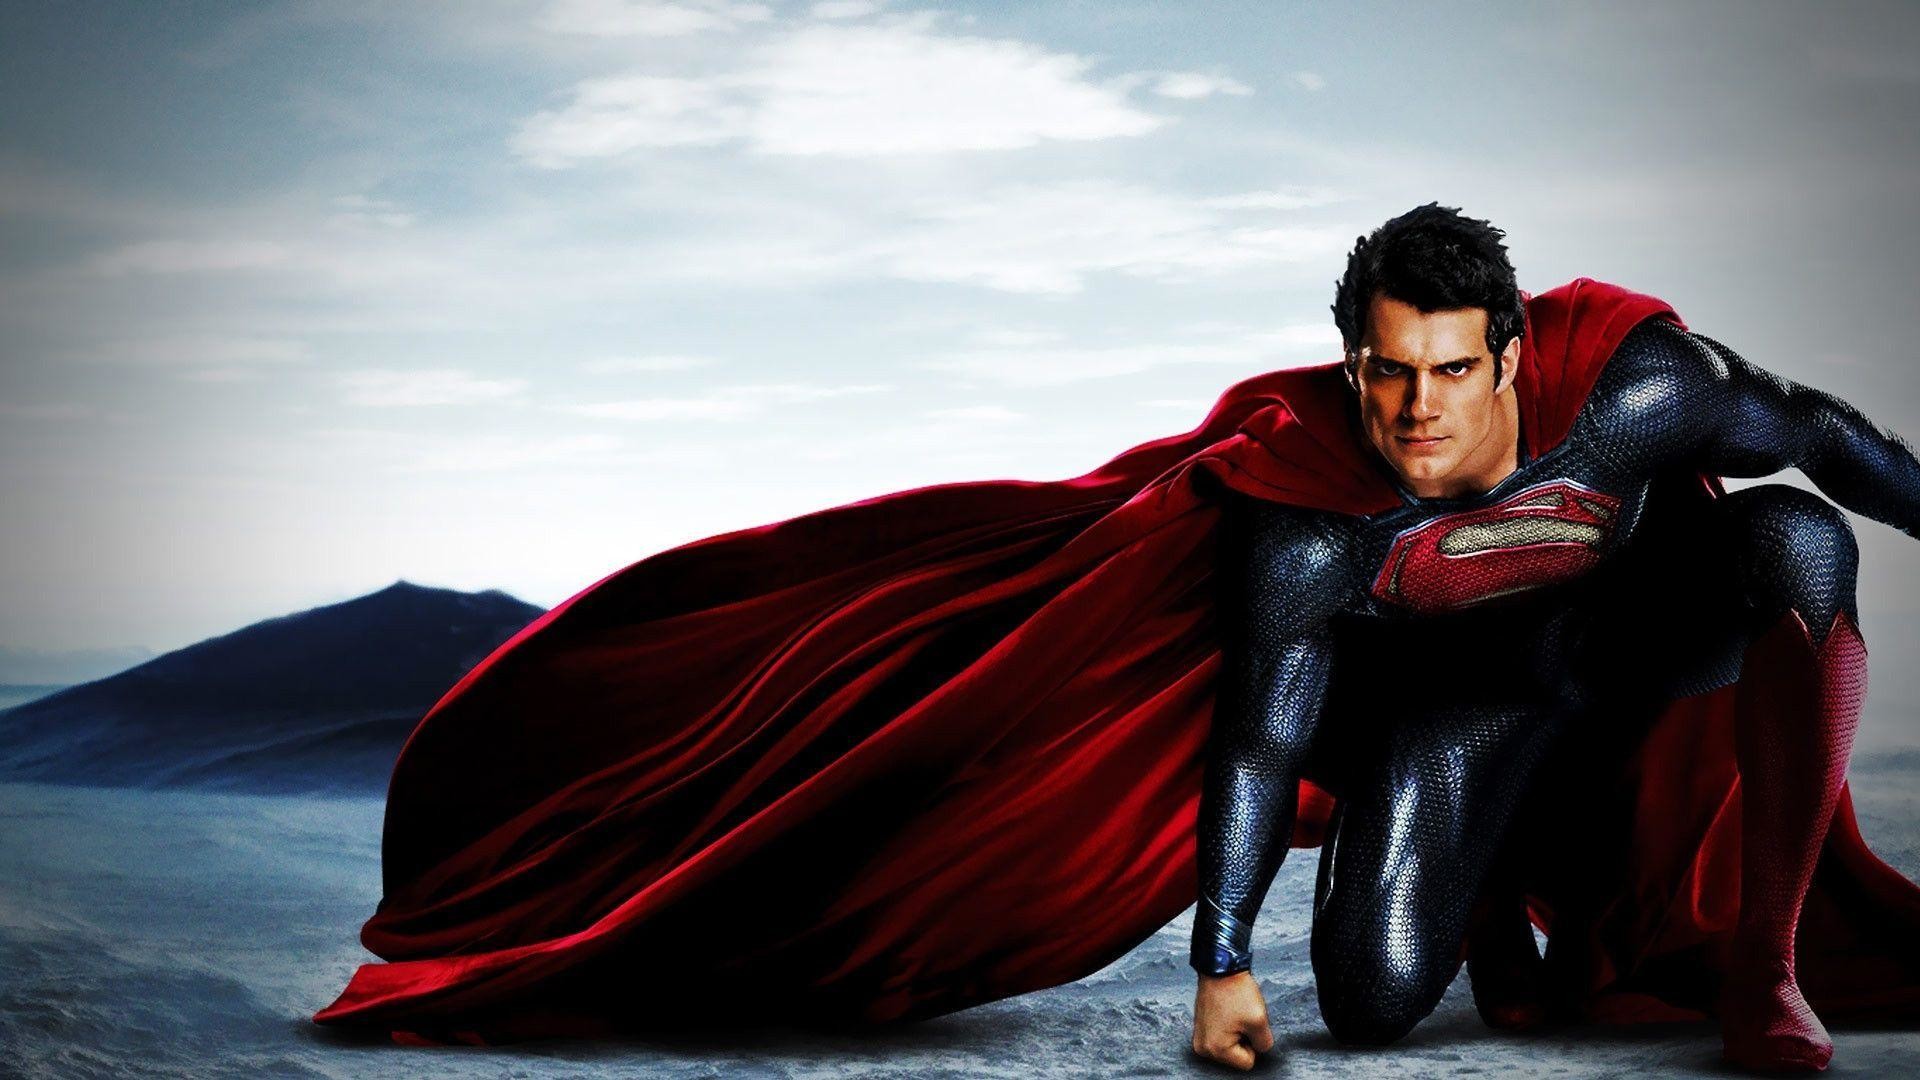 1920x1080 Superman HD Wallpapers | Superman Movie Wallpapers | Cool Wallpapers